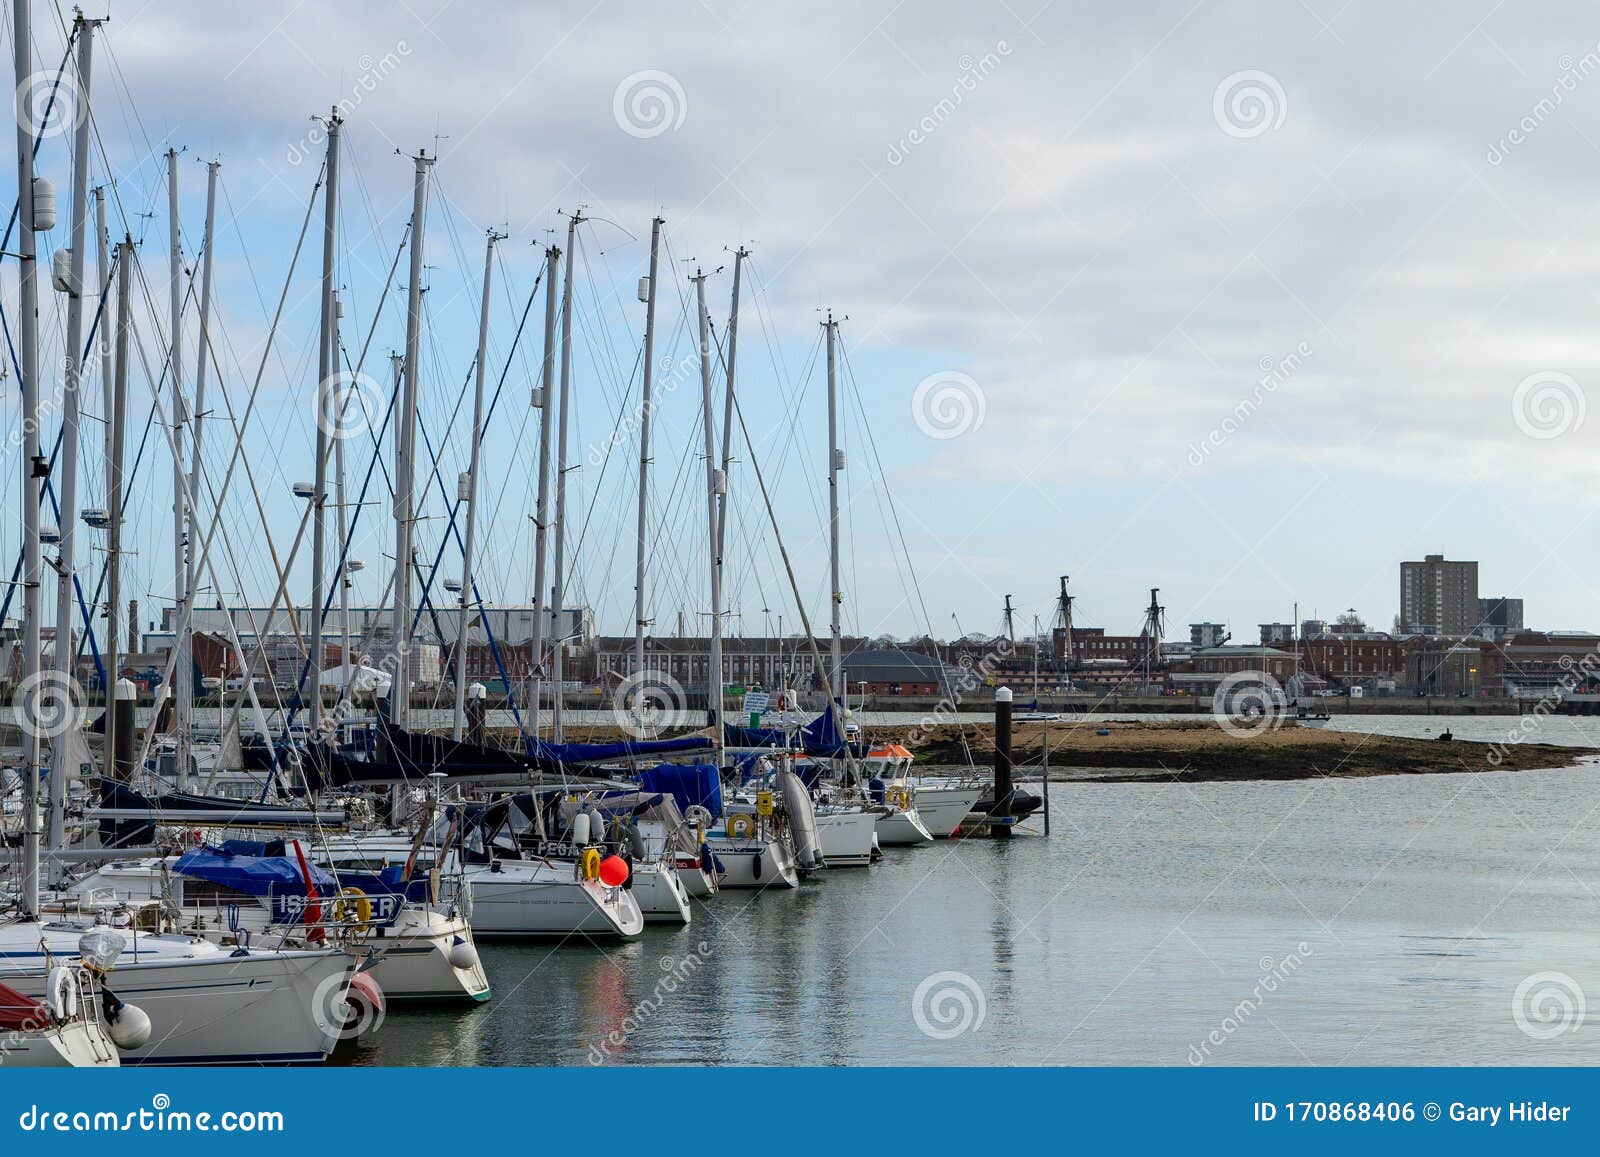 01 29 Gosport Hampshire Uk Sailing Boats Docked In Gosport Marina Hampshire With Hms Victory In The Background Editorial Photo Image Of Dock Harbours